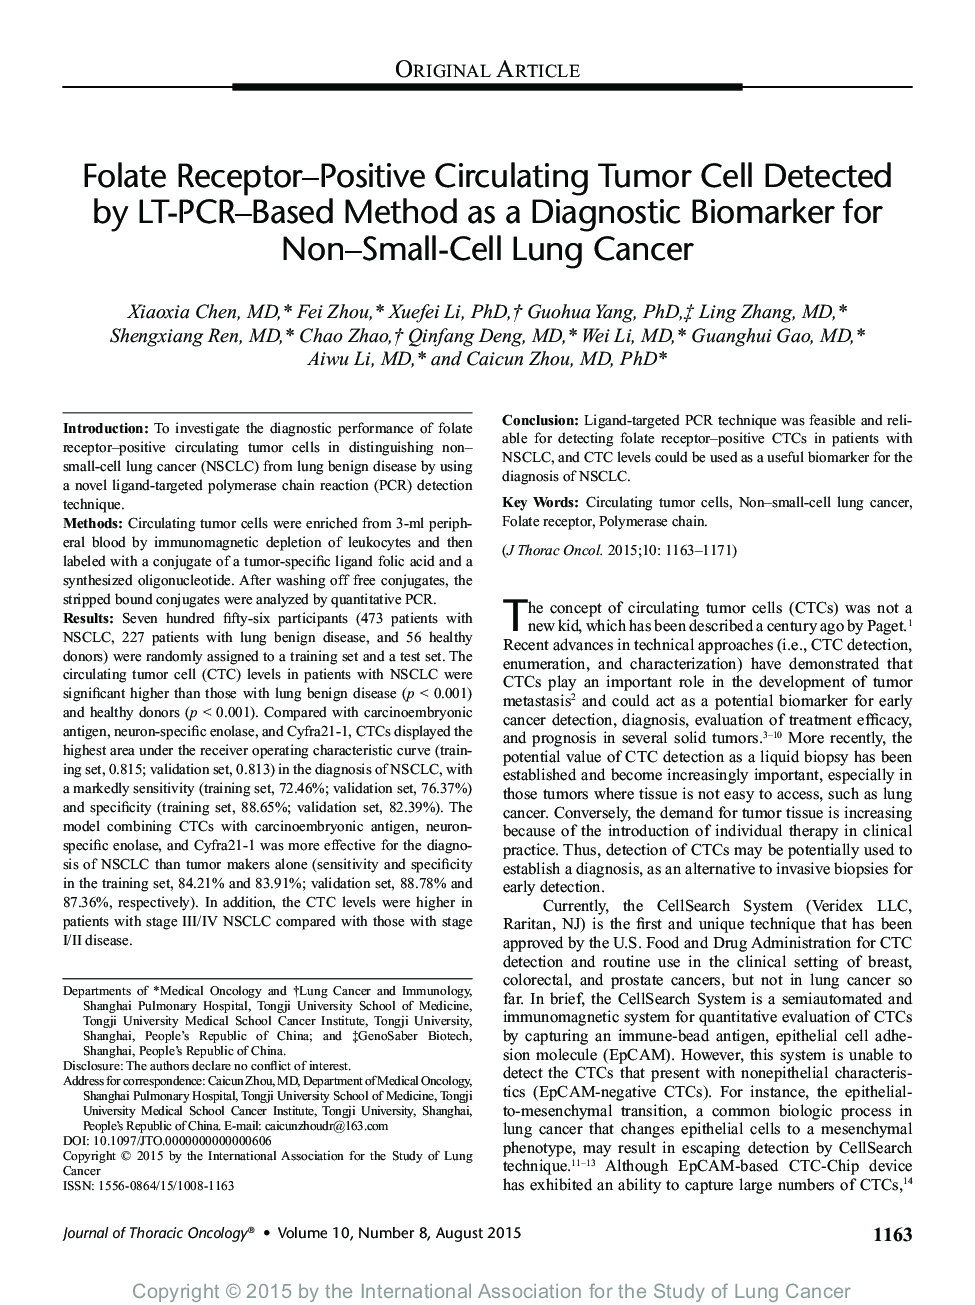 Folate Receptor-Positive Circulating Tumor Cell Detected by LT-PCR-Based Method as a Diagnostic Biomarker for Non-Small-Cell Lung Cancer